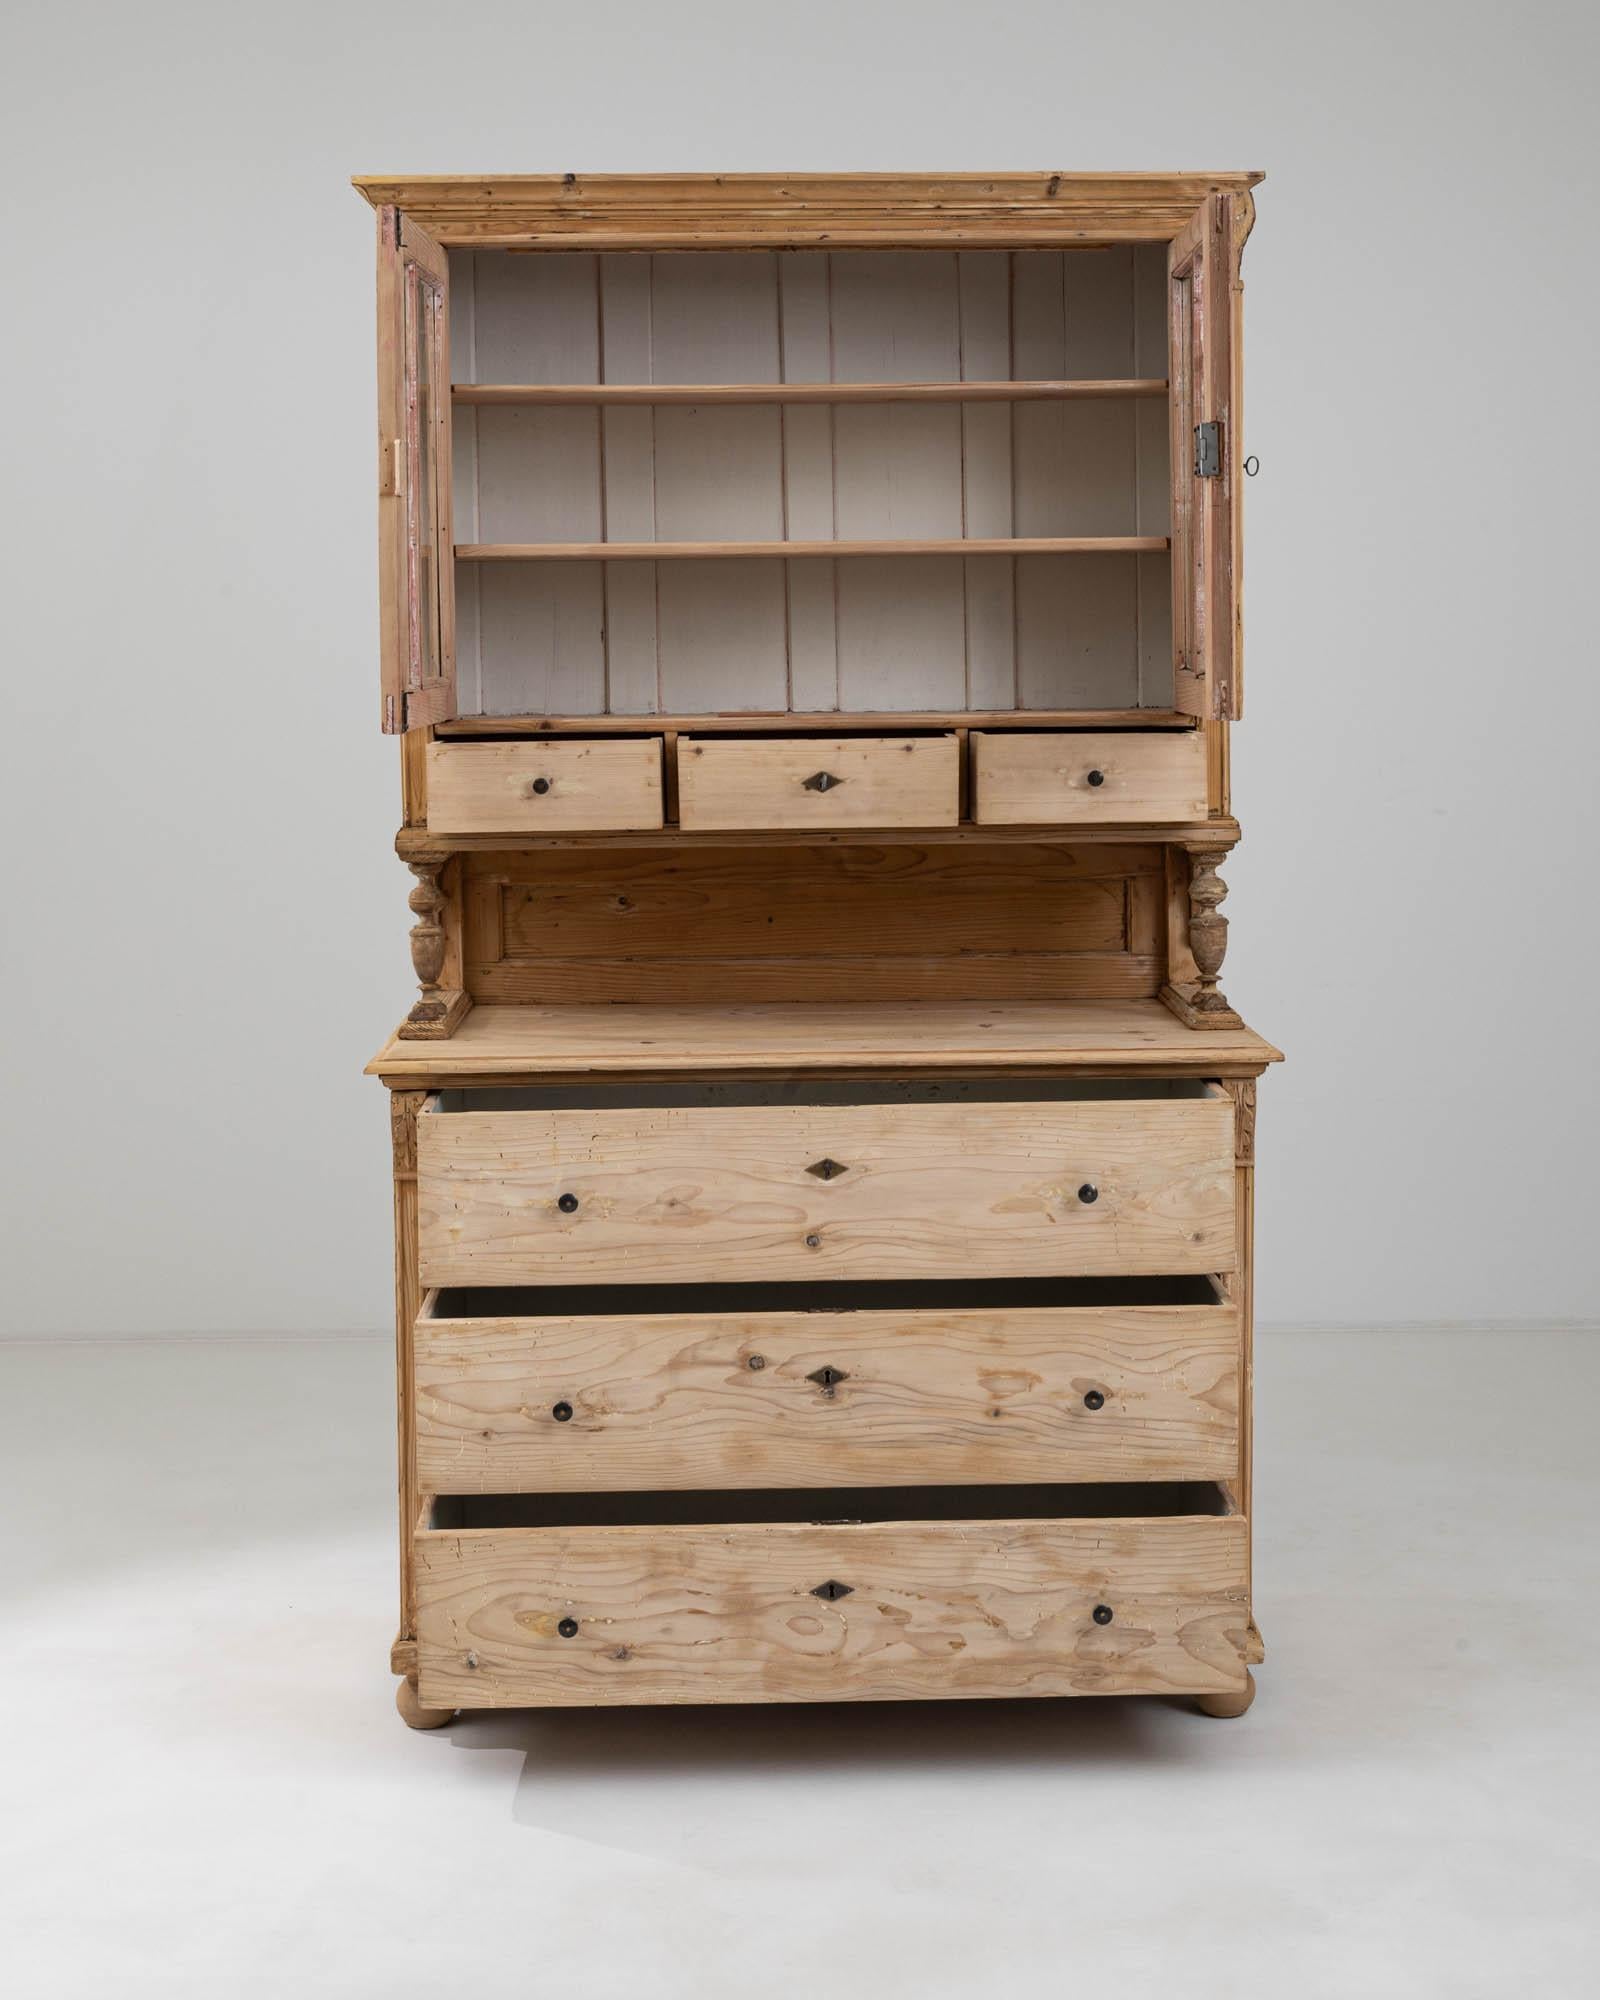 This 19th Century French Wooden Vitrine exudes the charm and elegance of a bygone era. The warm, honey-toned wood is beautifully crafted into a timeless design, featuring a spacious lower cabinet with smoothly gliding drawers, accented with